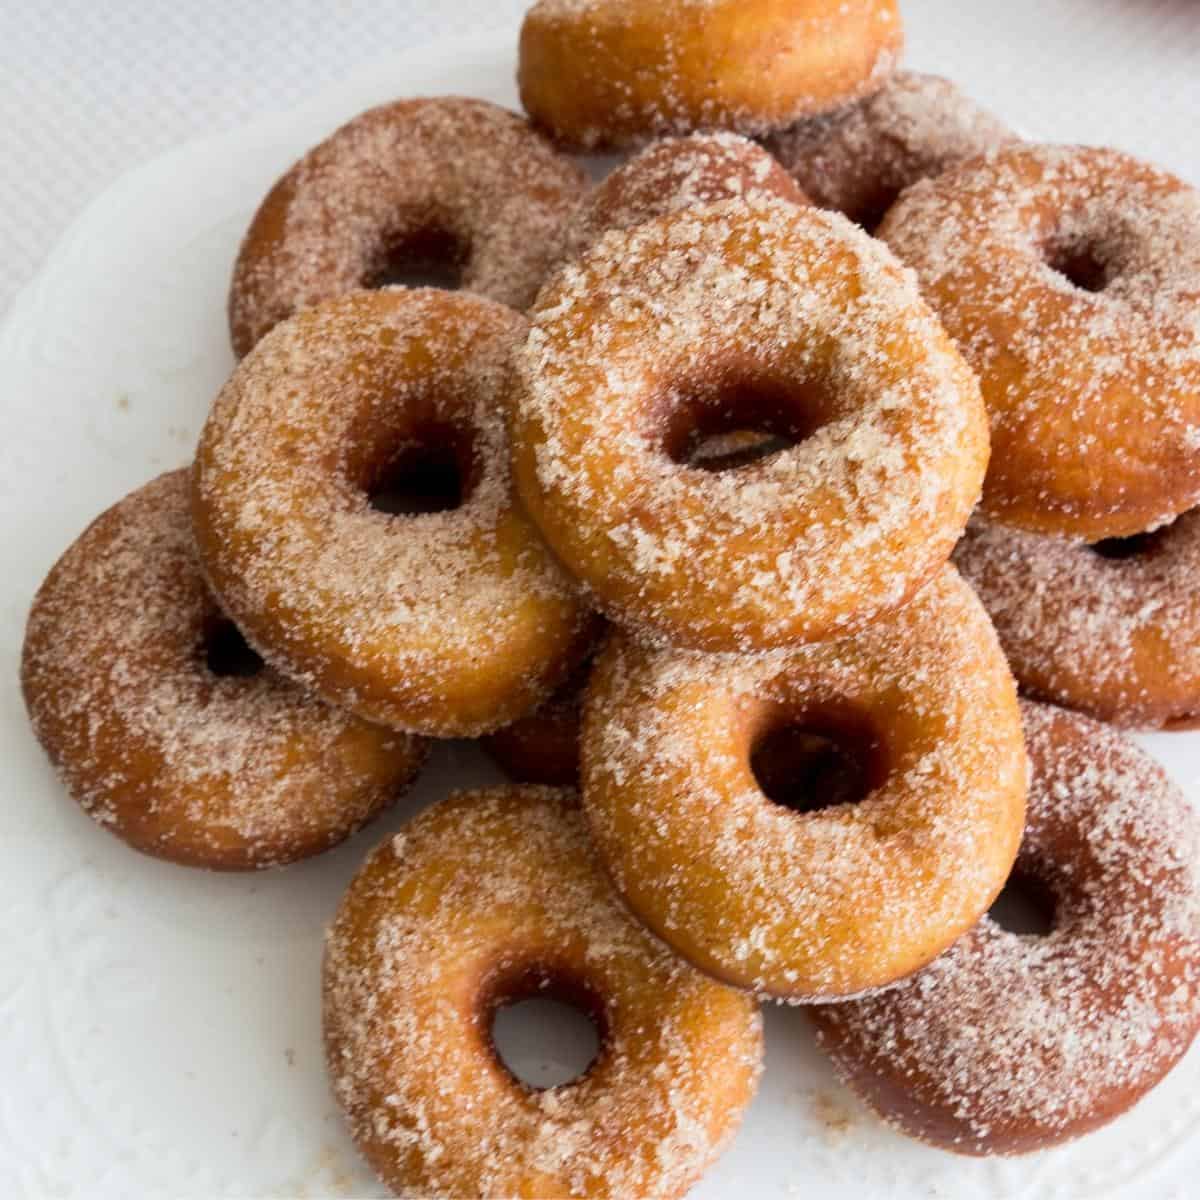 A stack of sugar donuts on a cake stand.